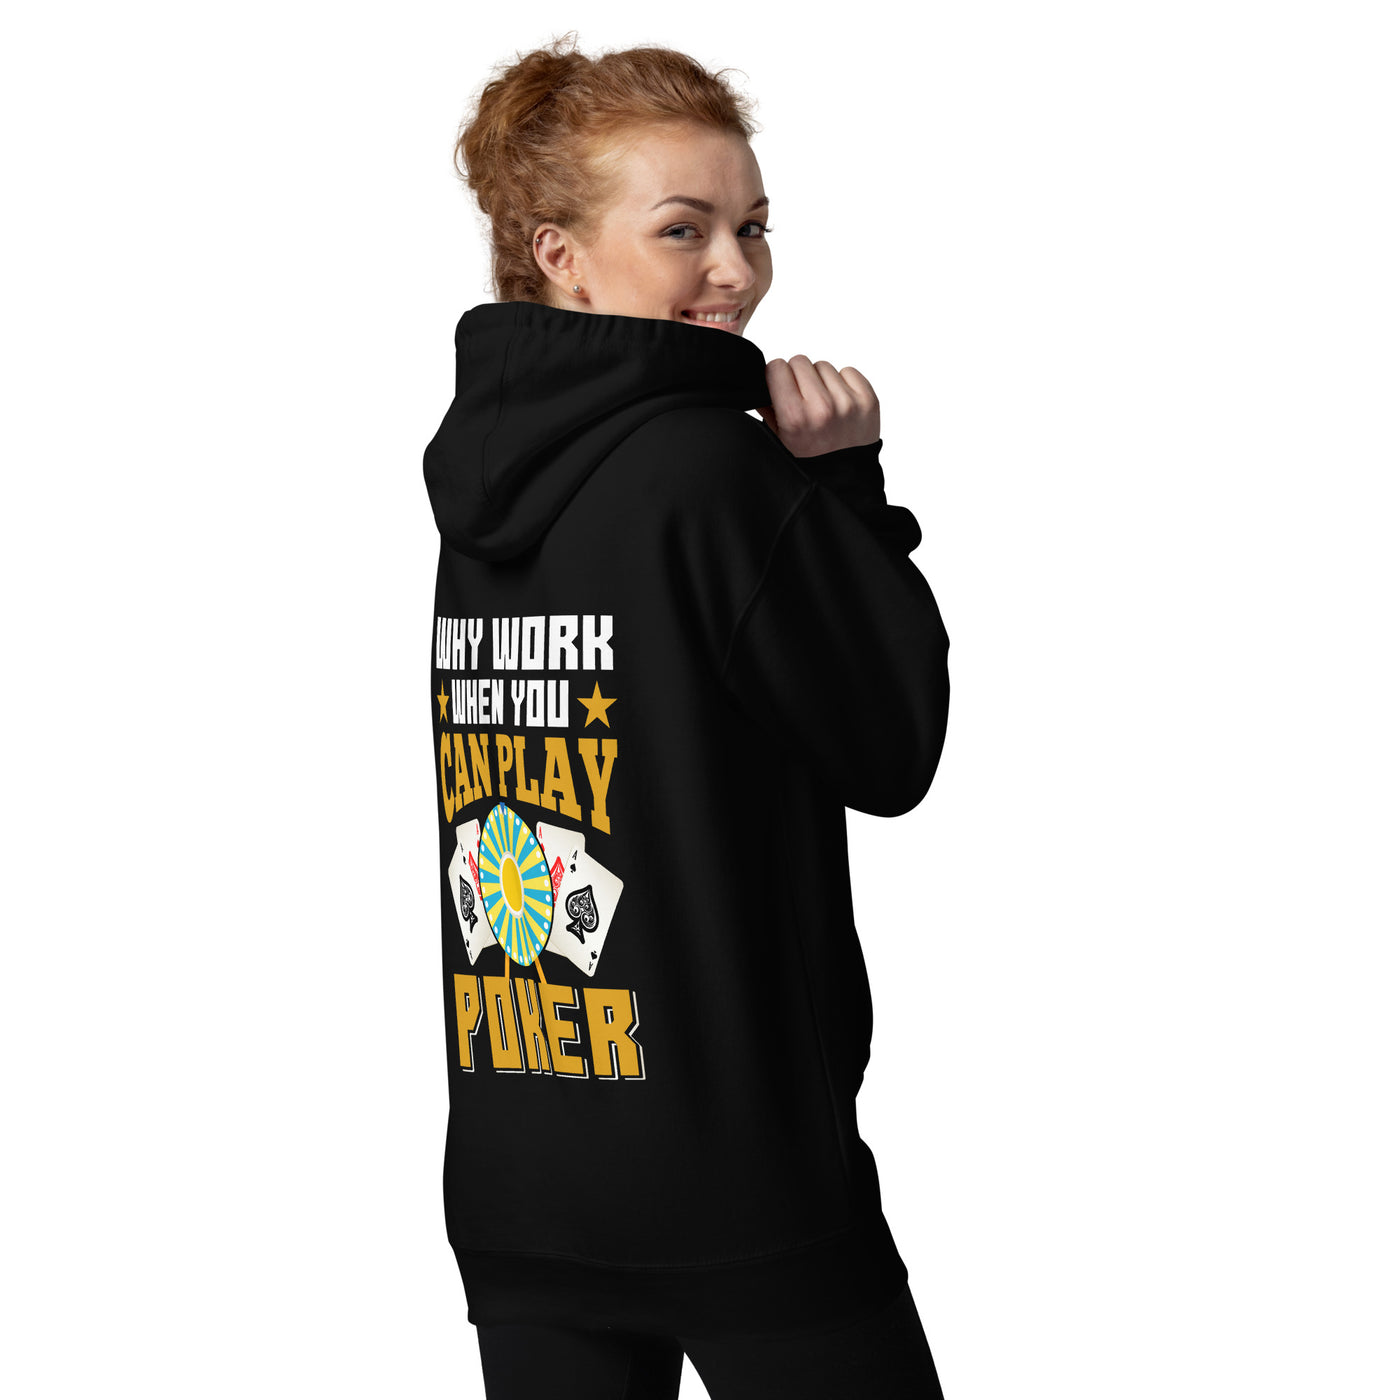 Why Work when you can Play Poker - Unisex Hoodie ( Back Print )